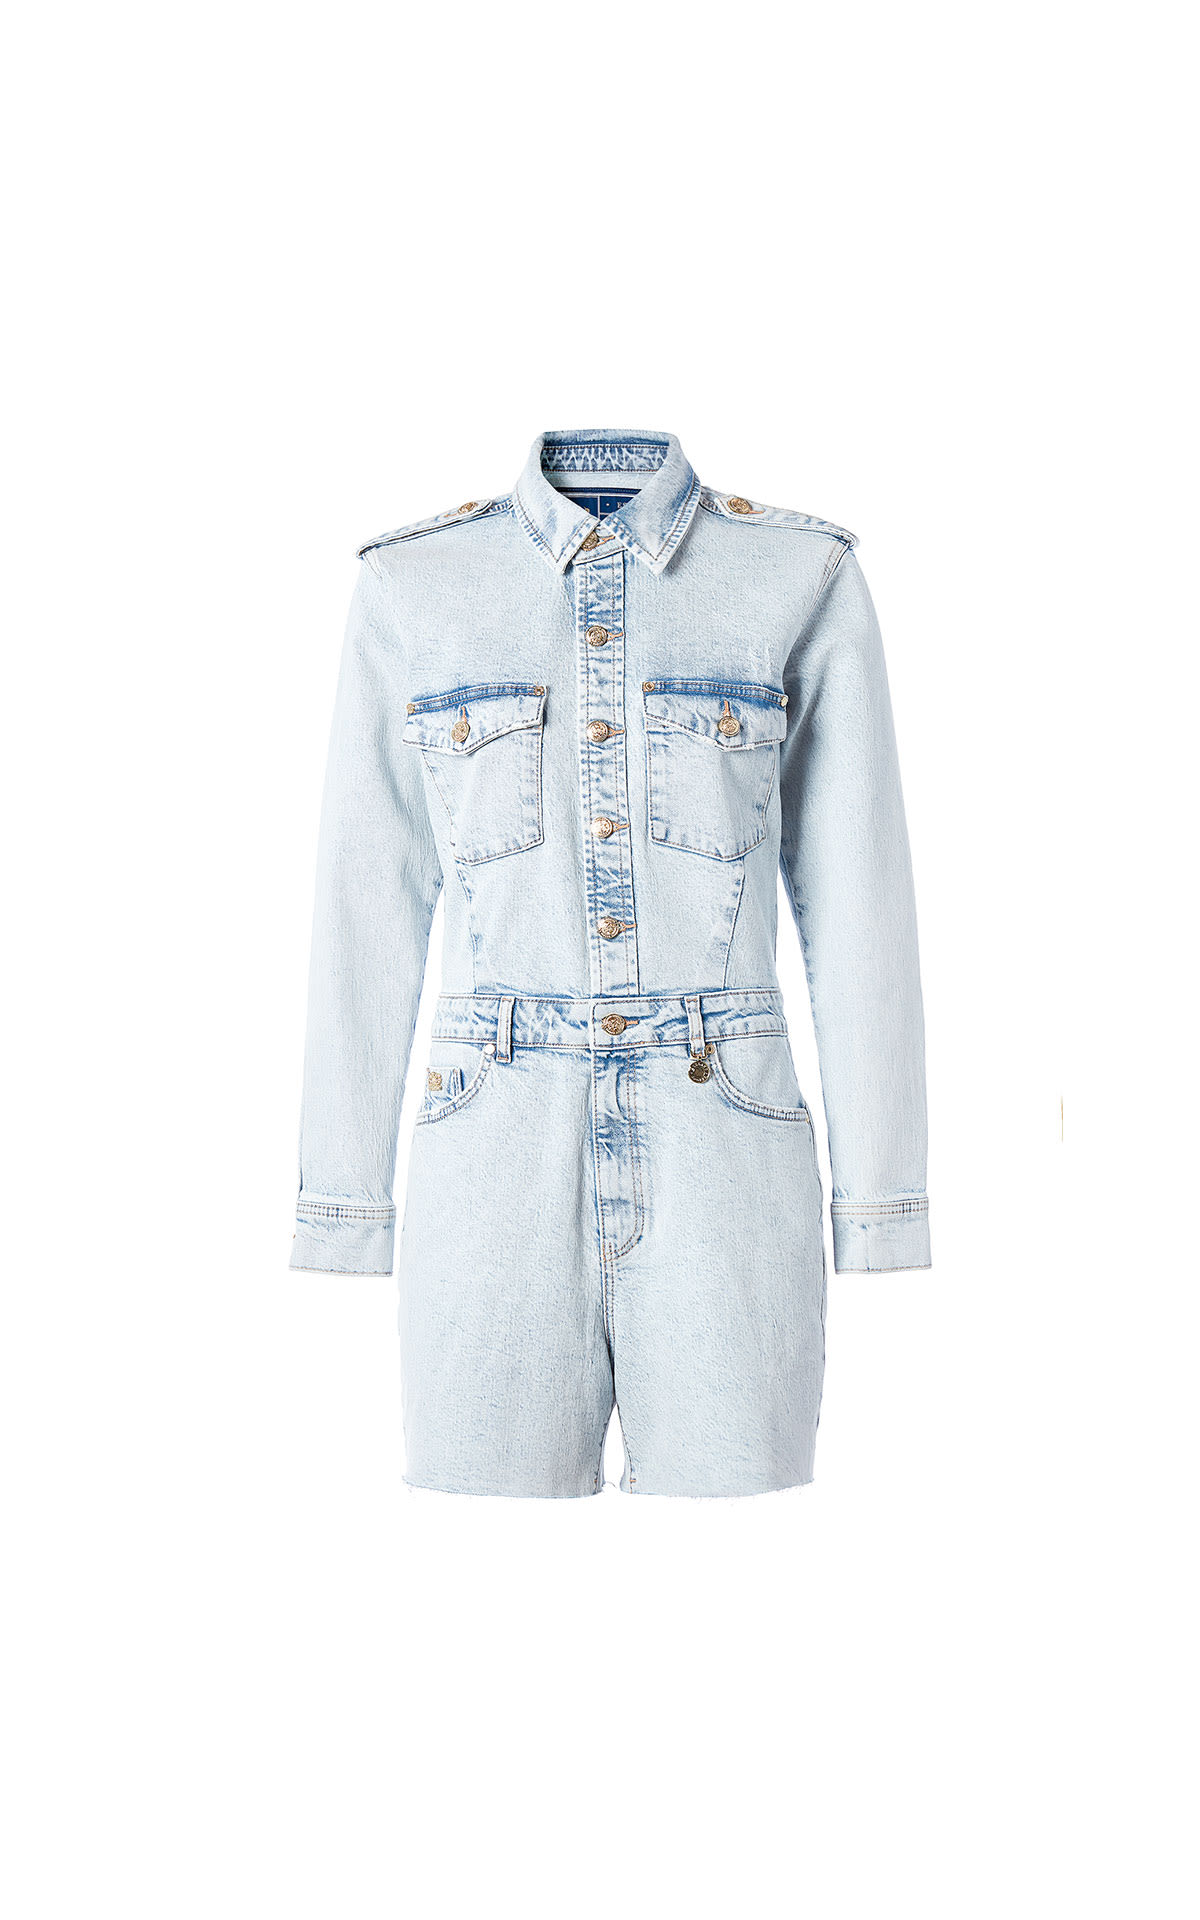 Holland Cooper Utility playsuit light stone wash from Bicester Village